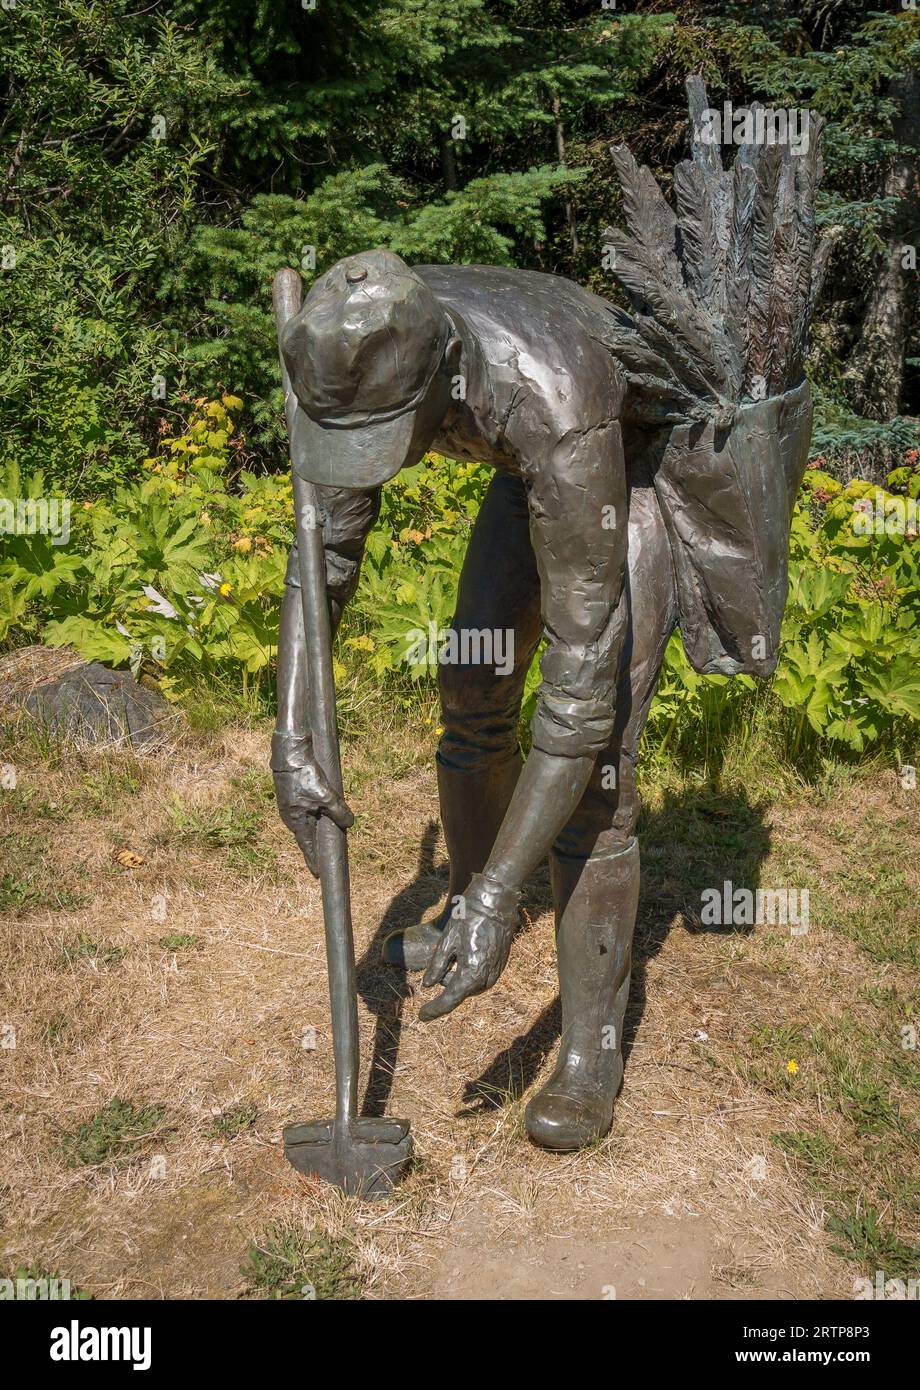 TOUTLE, WASHINGTON, USA - Tree planter statue sculpture, Mount St. Helens National Volcanic Monument, Gifford Pinchot National Forest, in the Cascades Stock Photo